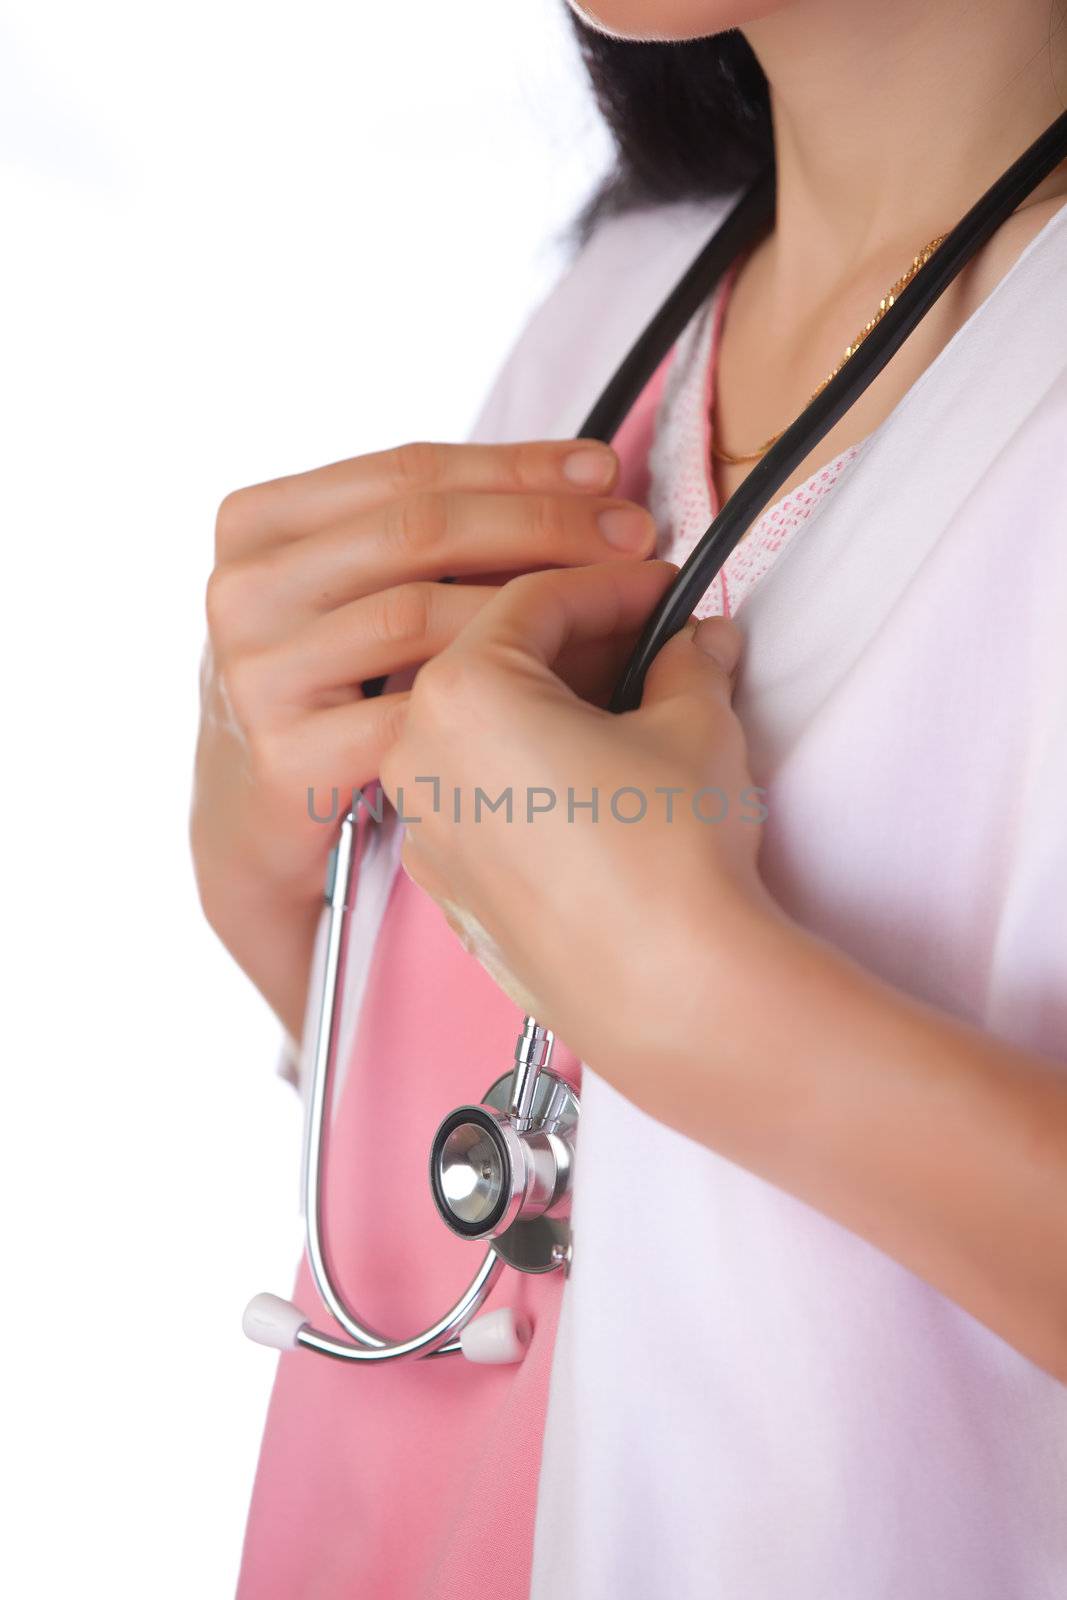 Female healthcare worker holding stethoscope hung around neck.